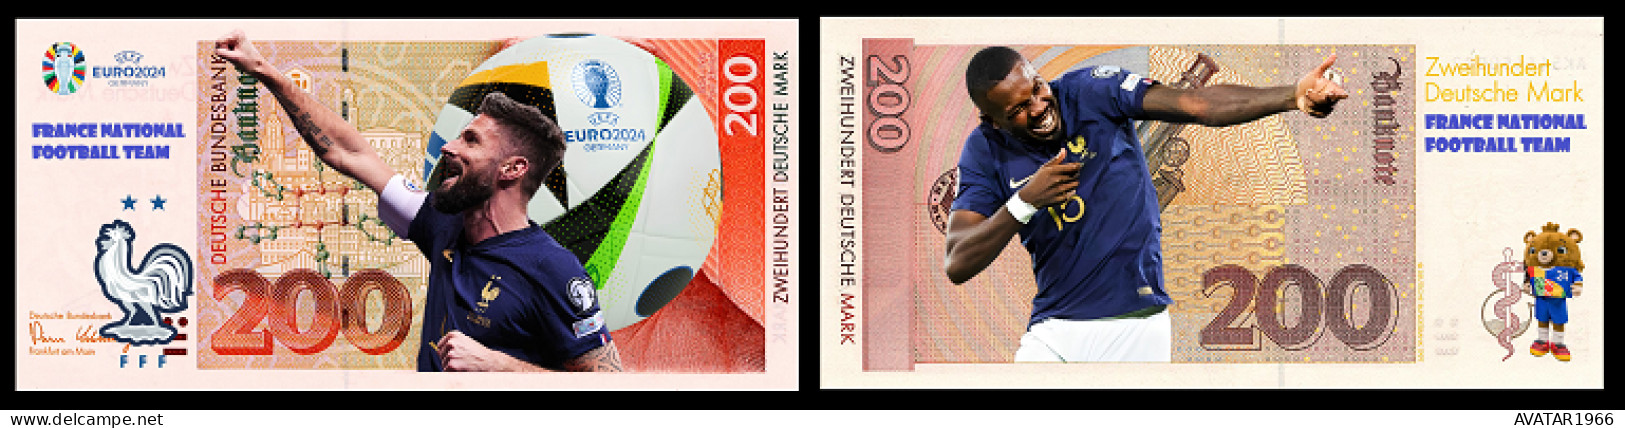 UEFA European Football Championship 2024 qualified country  France 8 pieces Germany fantasy paper money